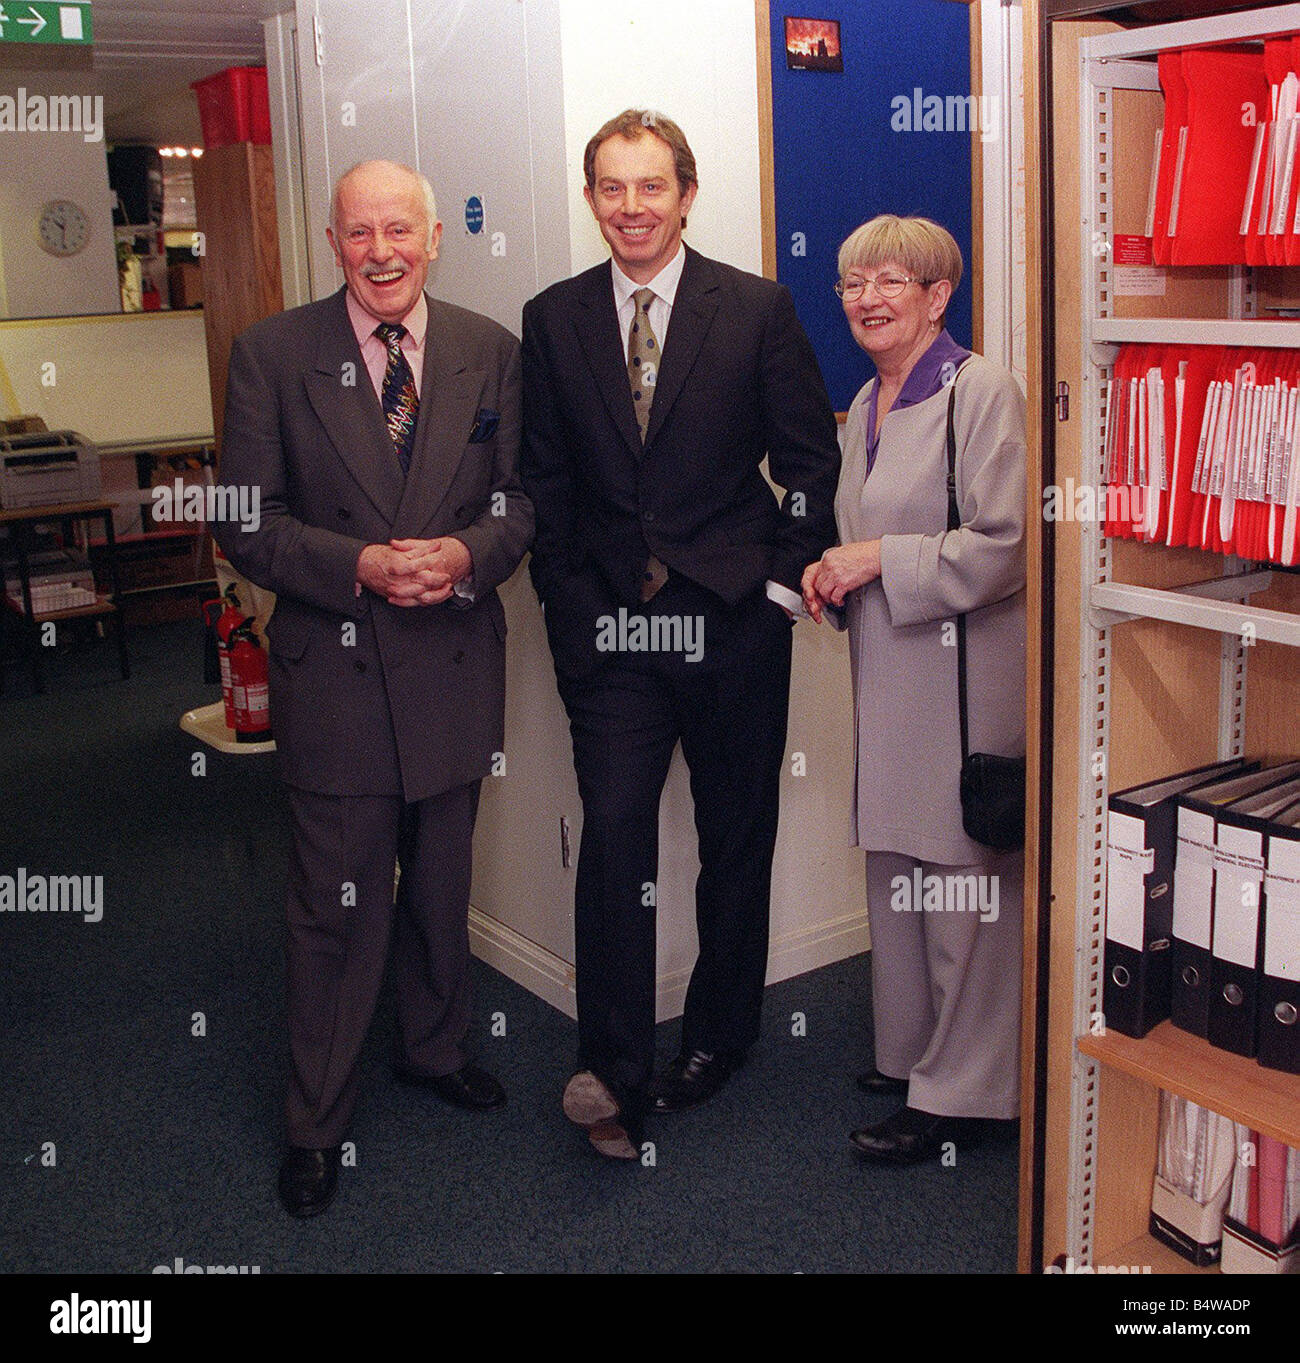 Tony Blair with actor Richard Wilson and Margaret Prosser at the Labour Party Headquarters Millbank Tower where Tony Blair unvieled a plaque to the late John Smith Stock Photo